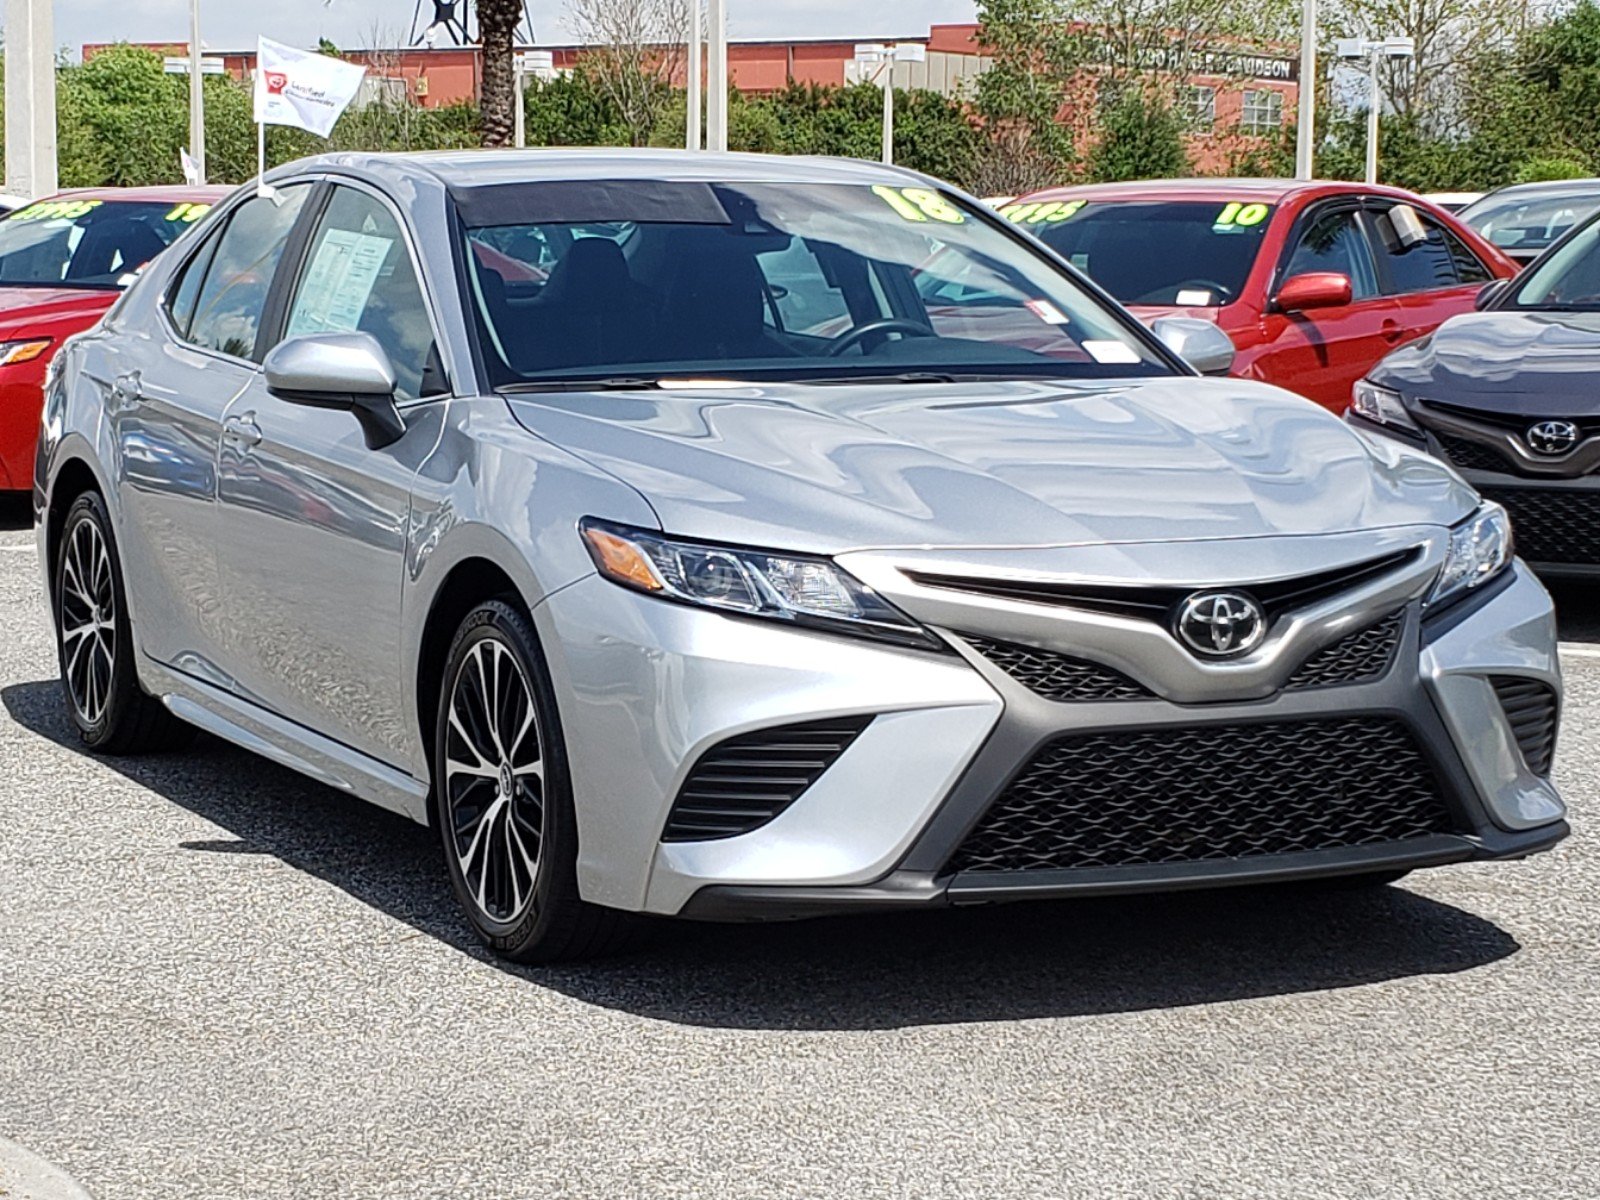 Certified Pre-Owned 2018 Toyota Camry SE 4dr Car in Orlando #0250394A ...